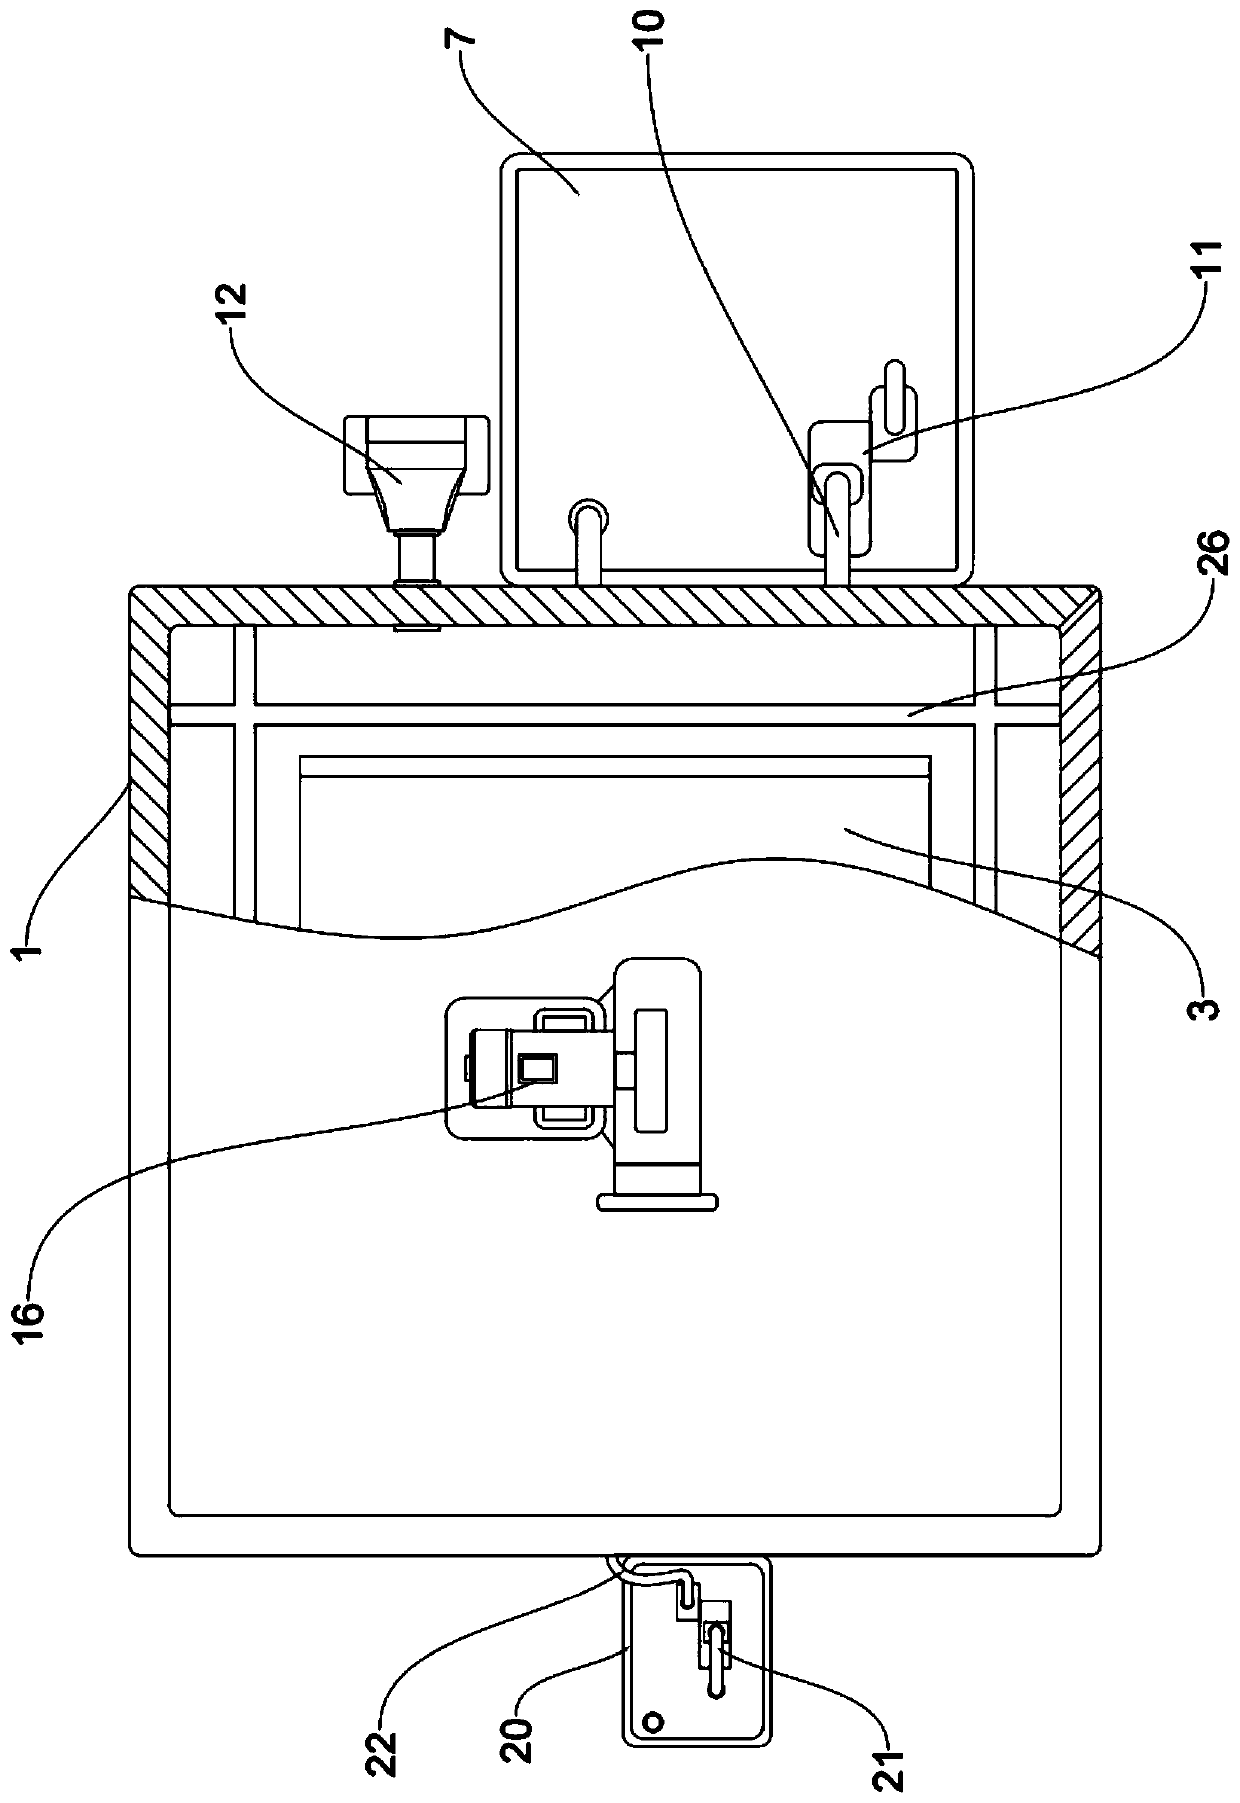 Full-automatic quail hatching device with automatic temperature control function